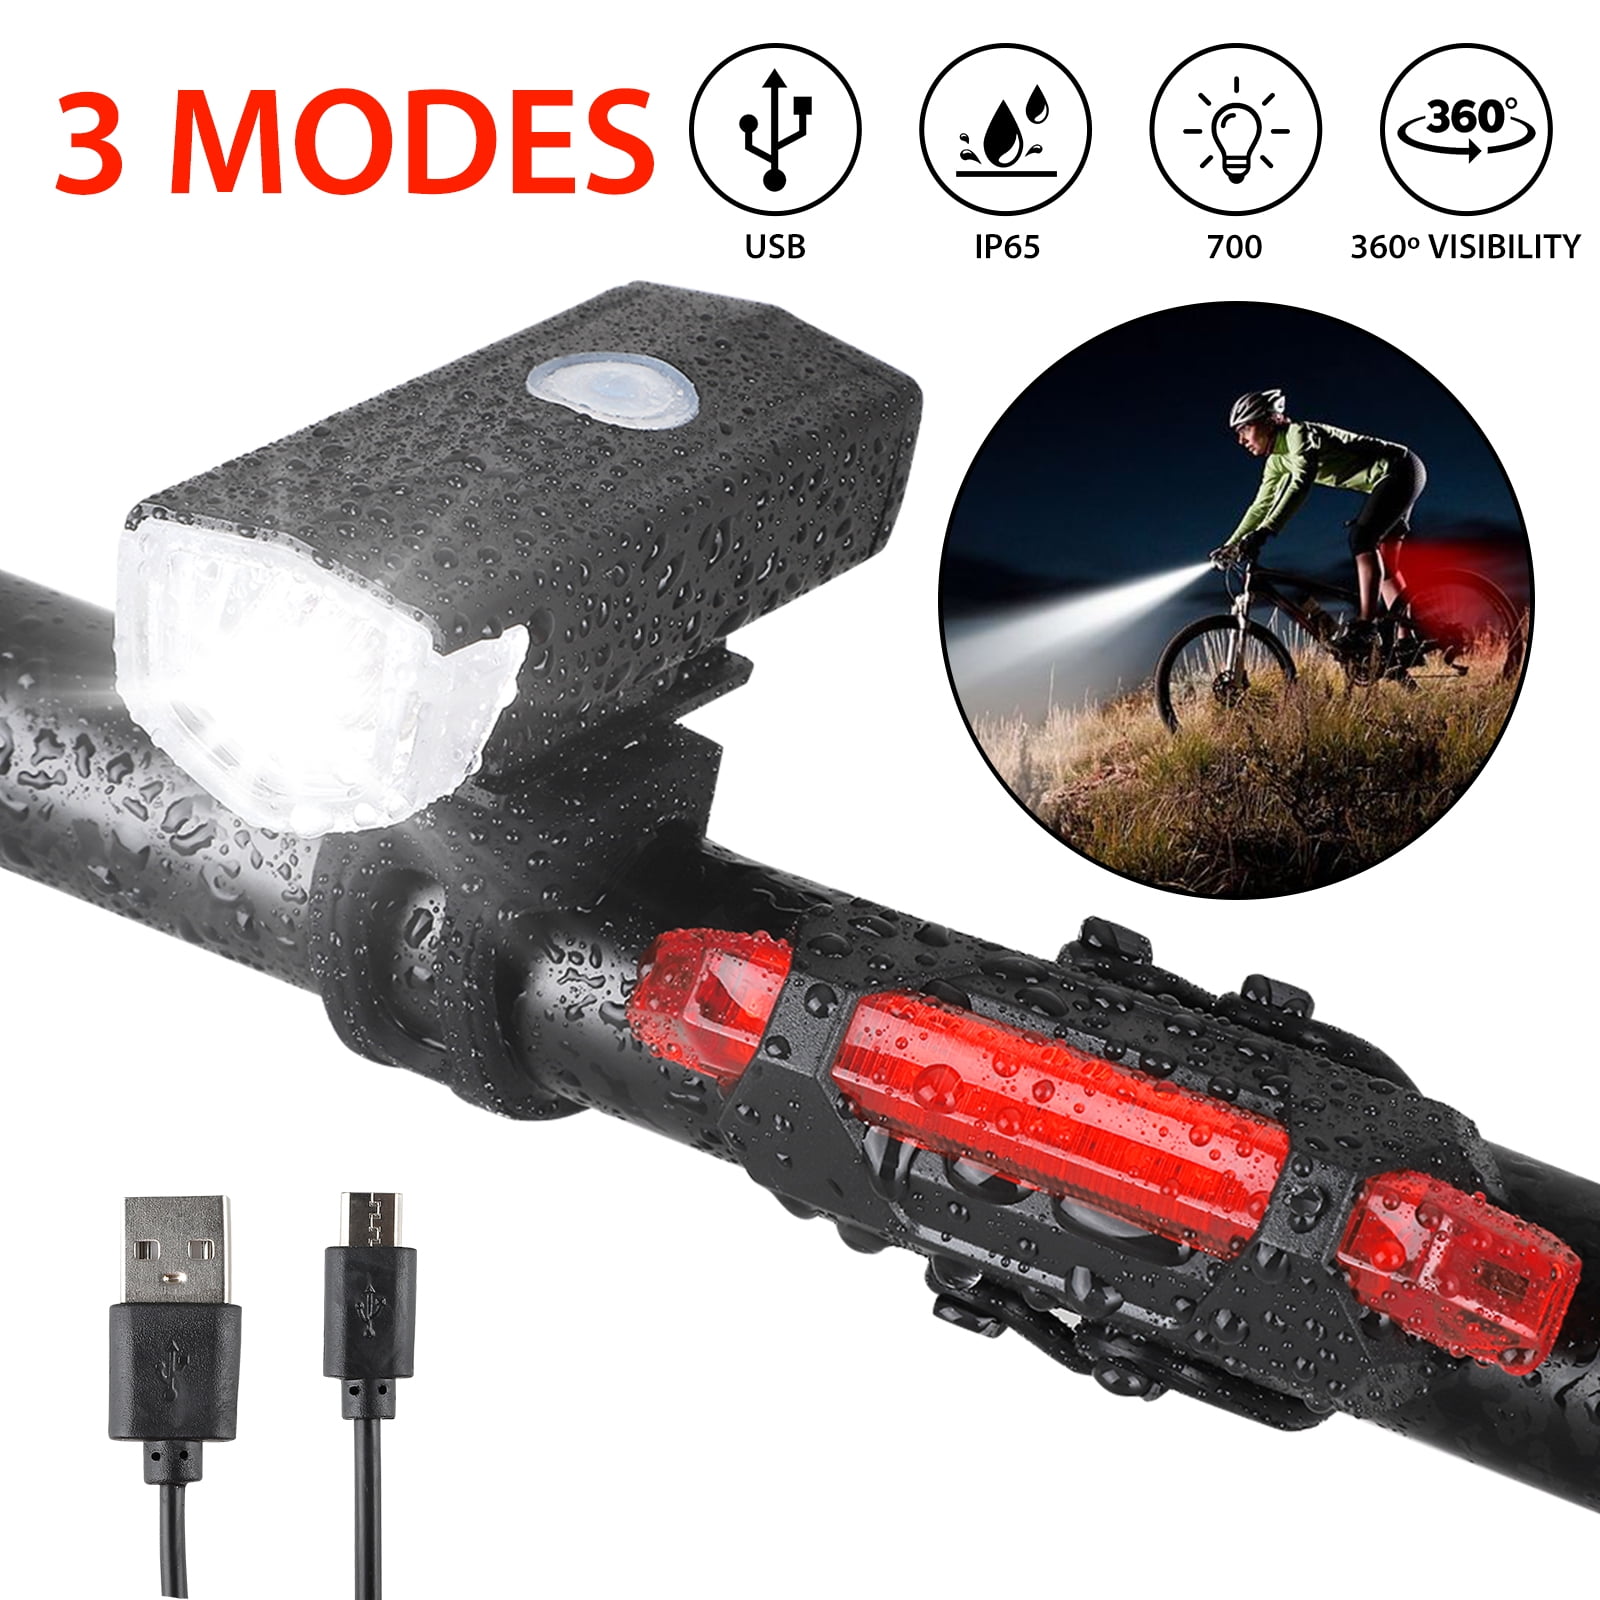 6 Light Modes 5IN1 Bike Light with Horn and Phone Charger,Waterproof Bicycle Front Headlight and Back Taillight Easy to Install for Road Mountain Cycling USB Rechargeable Bike Light Set with Cell Phone Holder